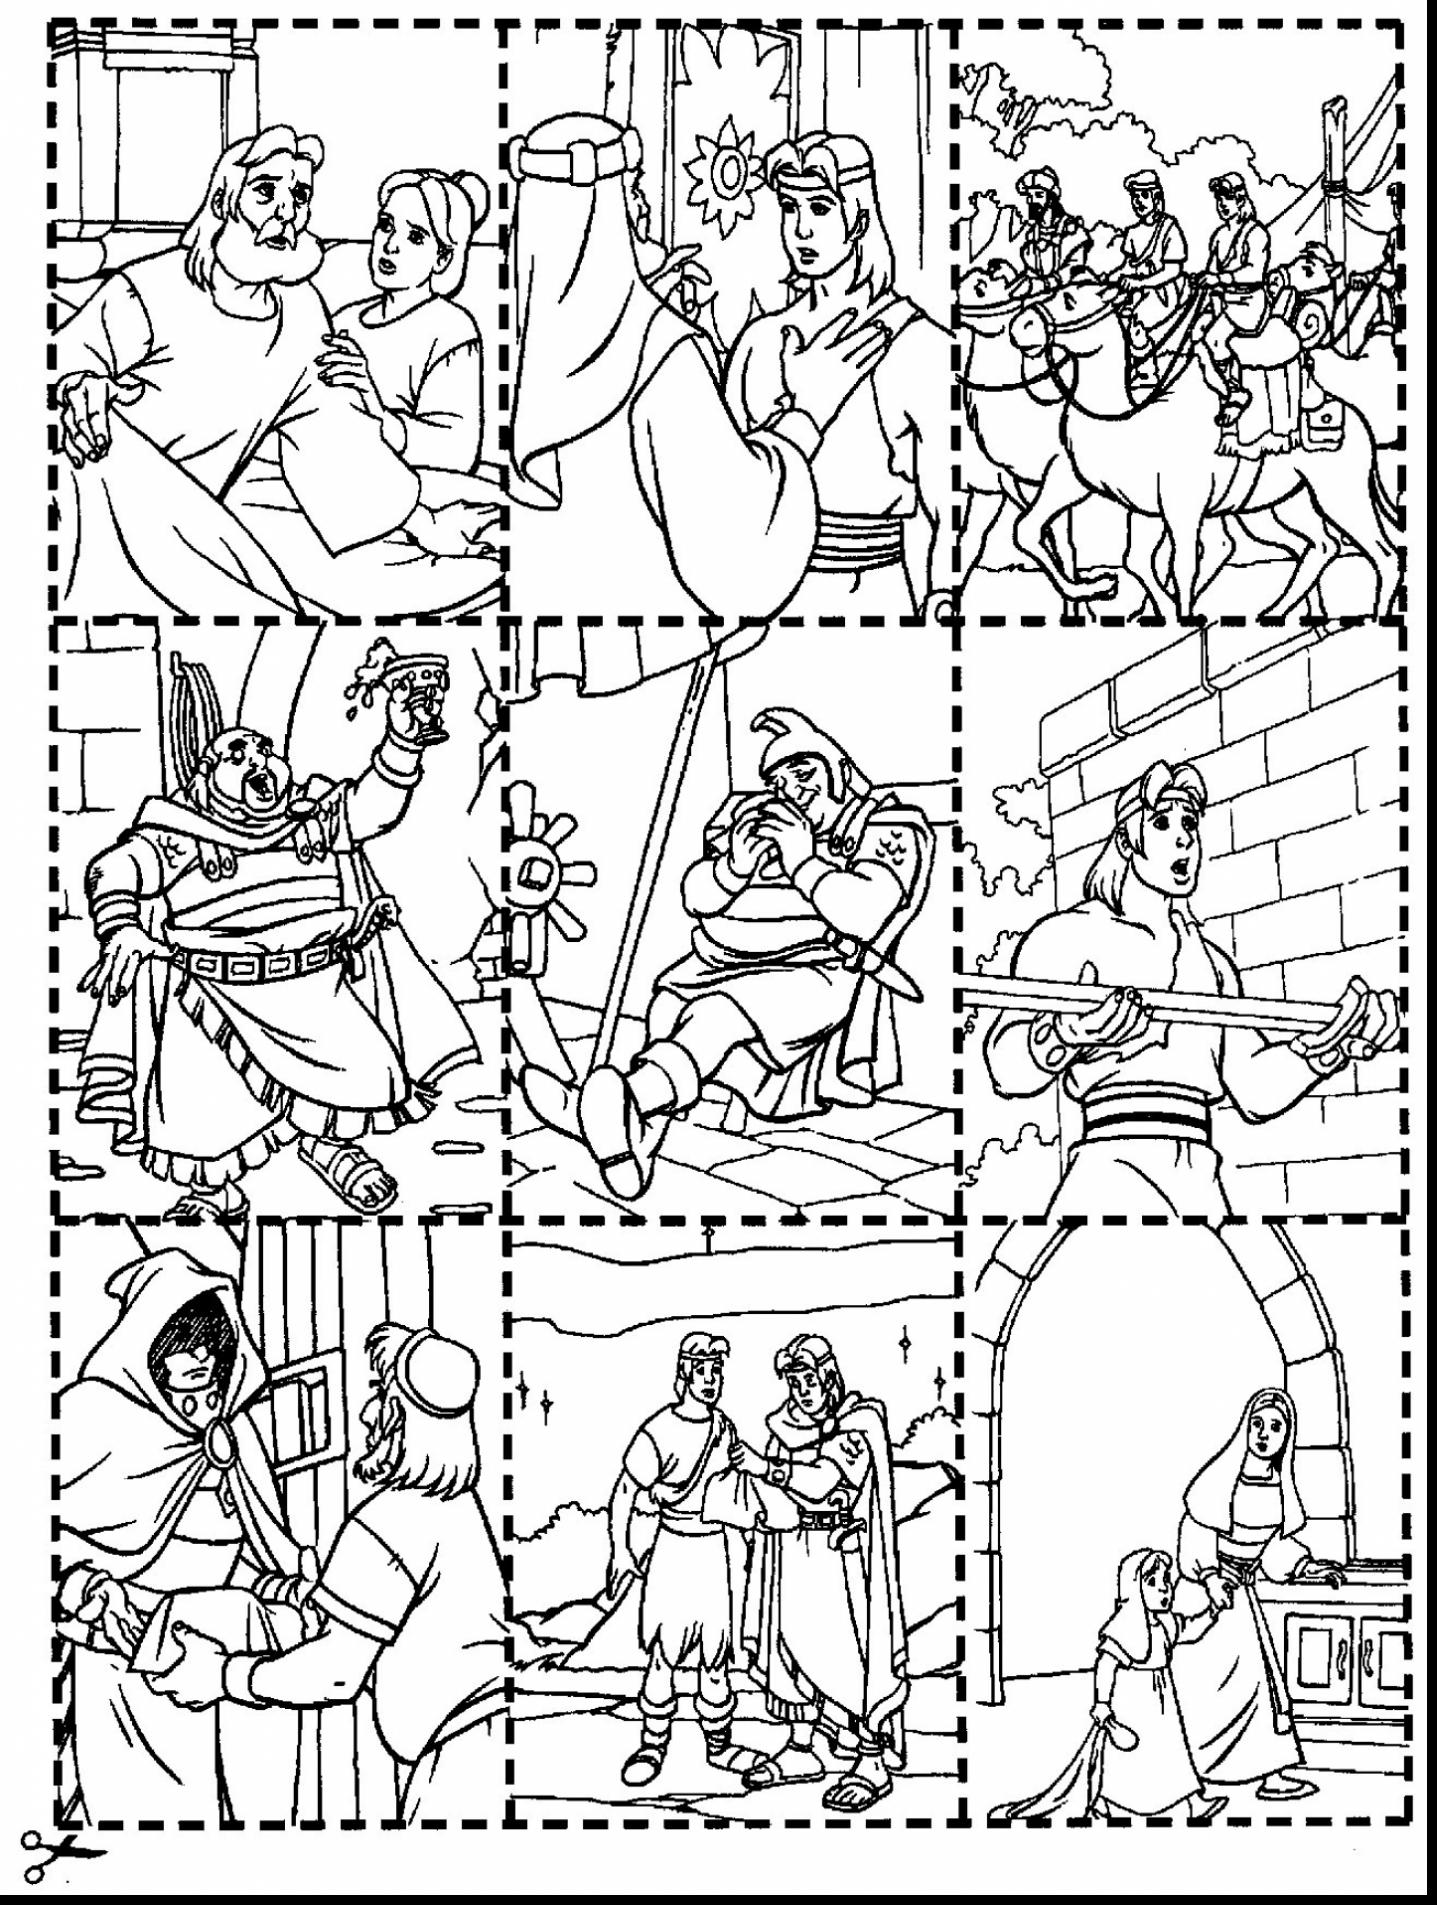 Lds Coloring Pages at GetColorings.com | Free printable colorings pages